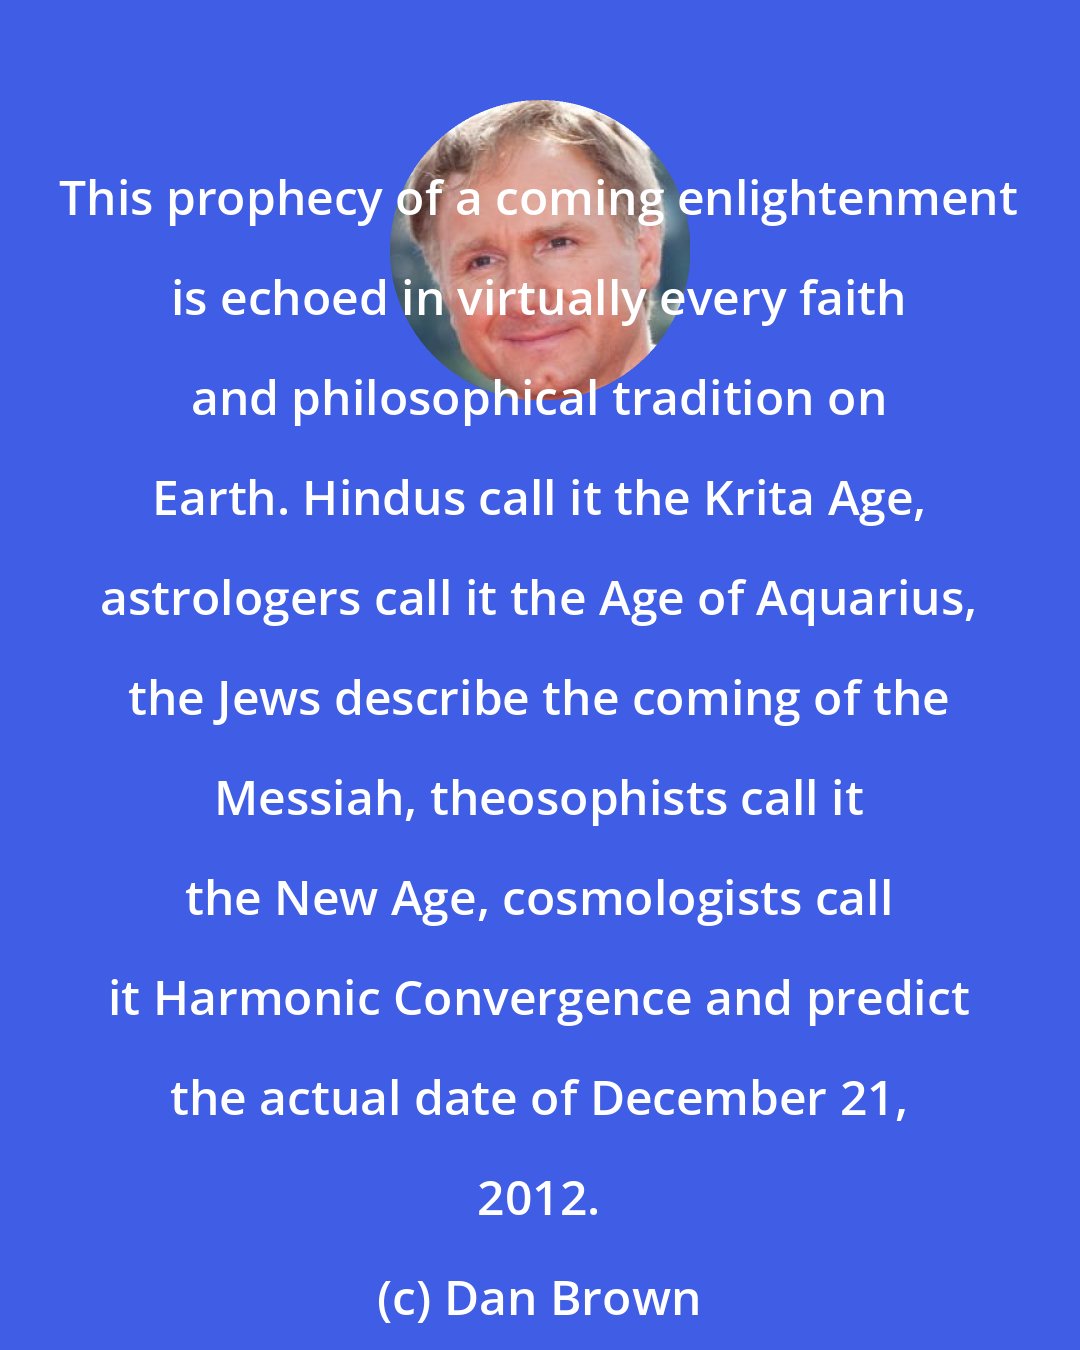 Dan Brown: This prophecy of a coming enlightenment is echoed in virtually every faith and philosophical tradition on Earth. Hindus call it the Krita Age, astrologers call it the Age of Aquarius, the Jews describe the coming of the Messiah, theosophists call it the New Age, cosmologists call it Harmonic Convergence and predict the actual date of December 21, 2012.